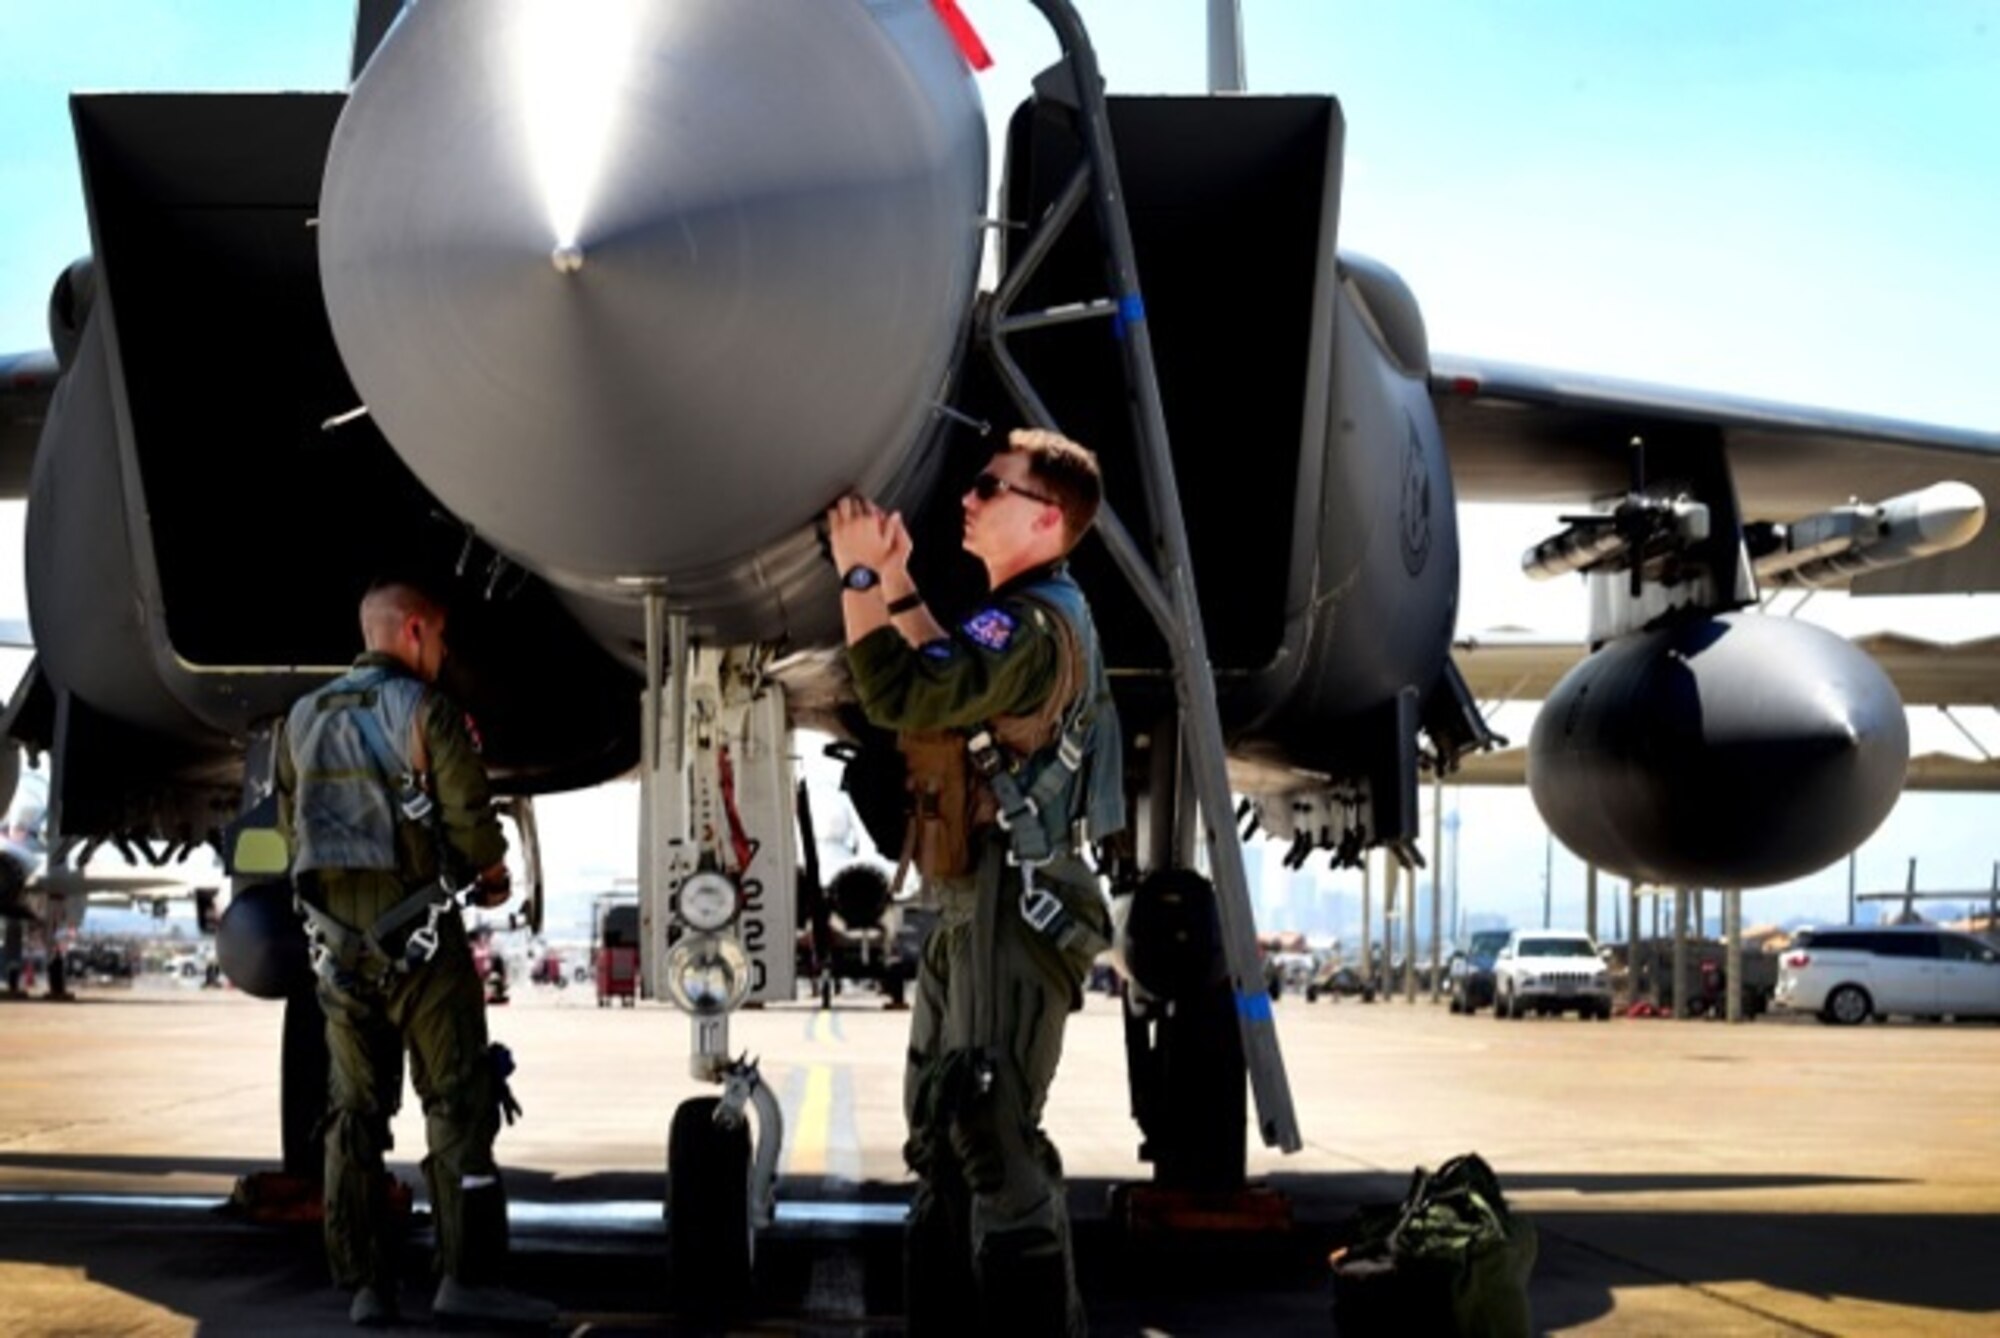 U.S. Air Force 1st Lieutenant Drew Lyons, 492nd Fighter Squadron, F-15E Strike Eagle pilot, and 1st Lieutenant J. Paul Reasner, 492nd FS, F-15E Strike Eagle weapon systems officer inspect their aircraft prior to a sortie in support of exercise Red Flag 16-4 at Nellis Air Force Base, Nev. Aug 17. Red Flag is a realistic combat exercise involving U.S. and allied air forces conducing training operations on the 15,000 square mile Nevada Test and Training Range. (U.S. Air Force photo/ Tech. Sgt. Matthew Plew)